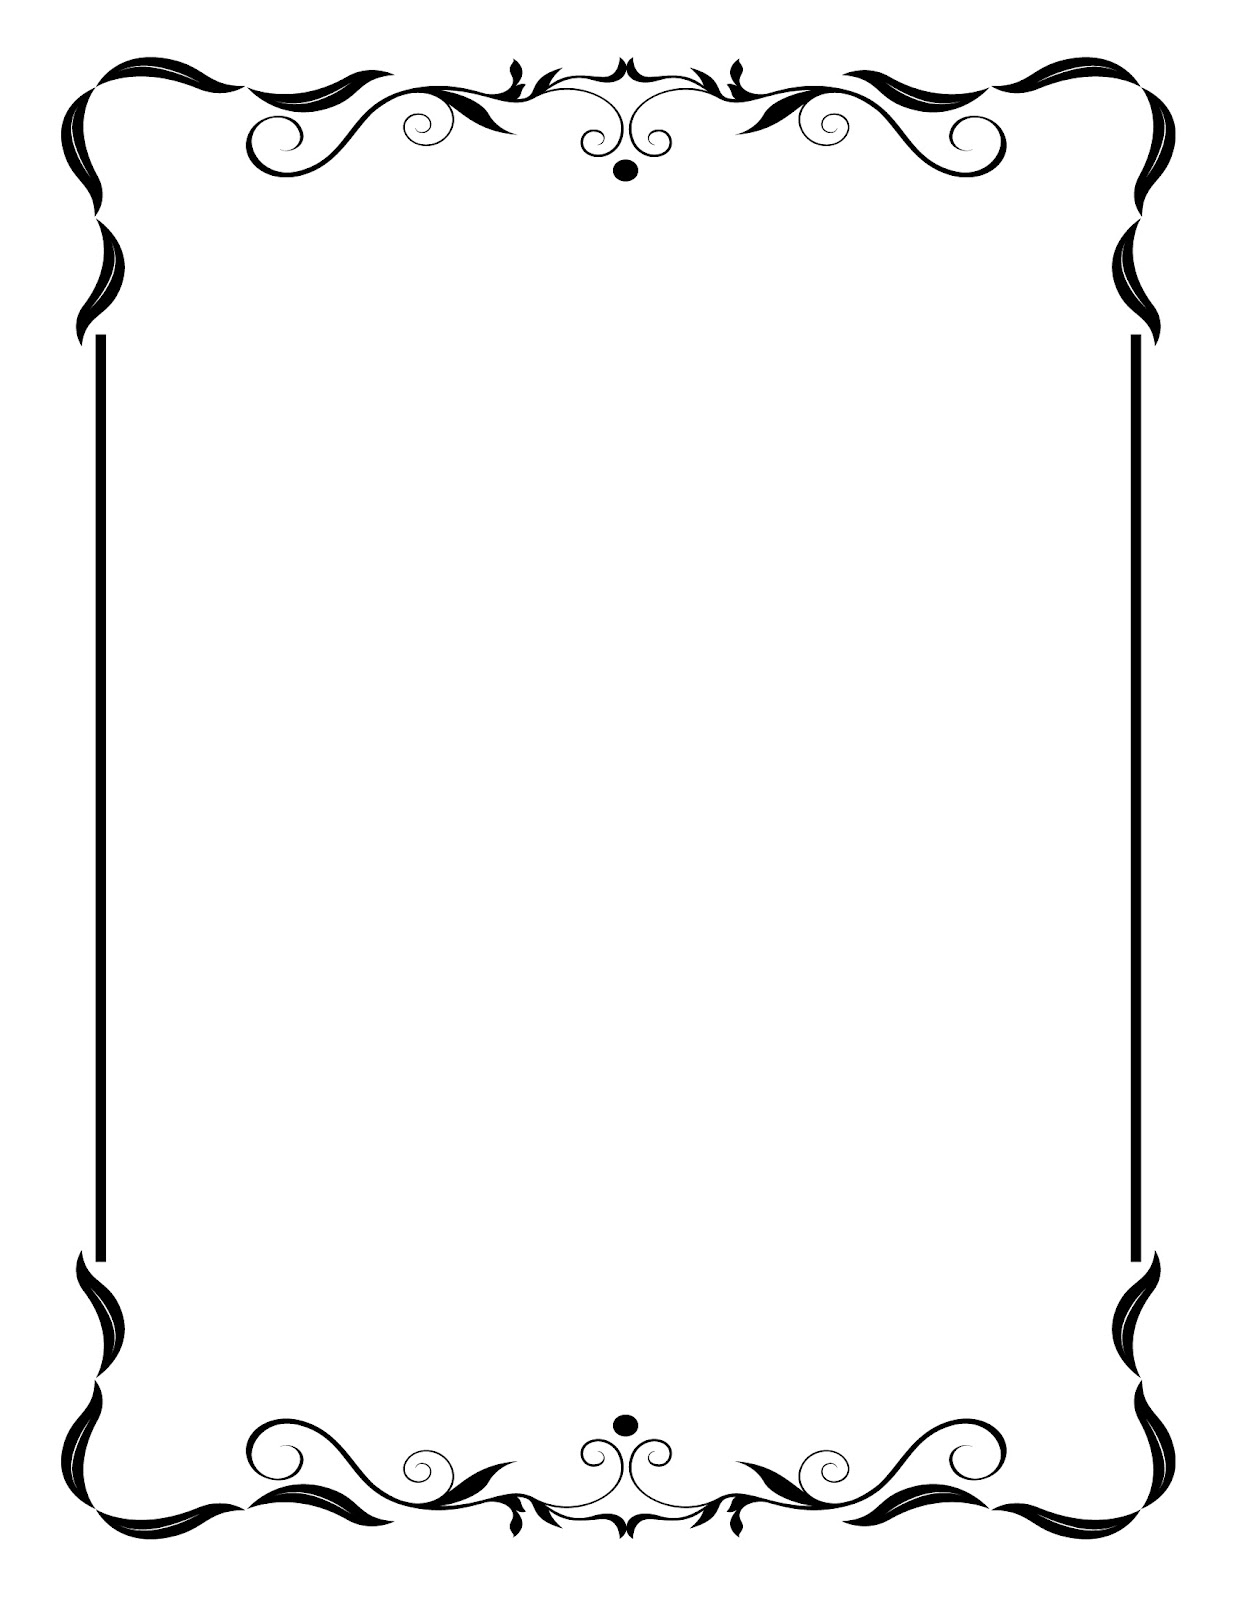 ... Clipart Frames And Border